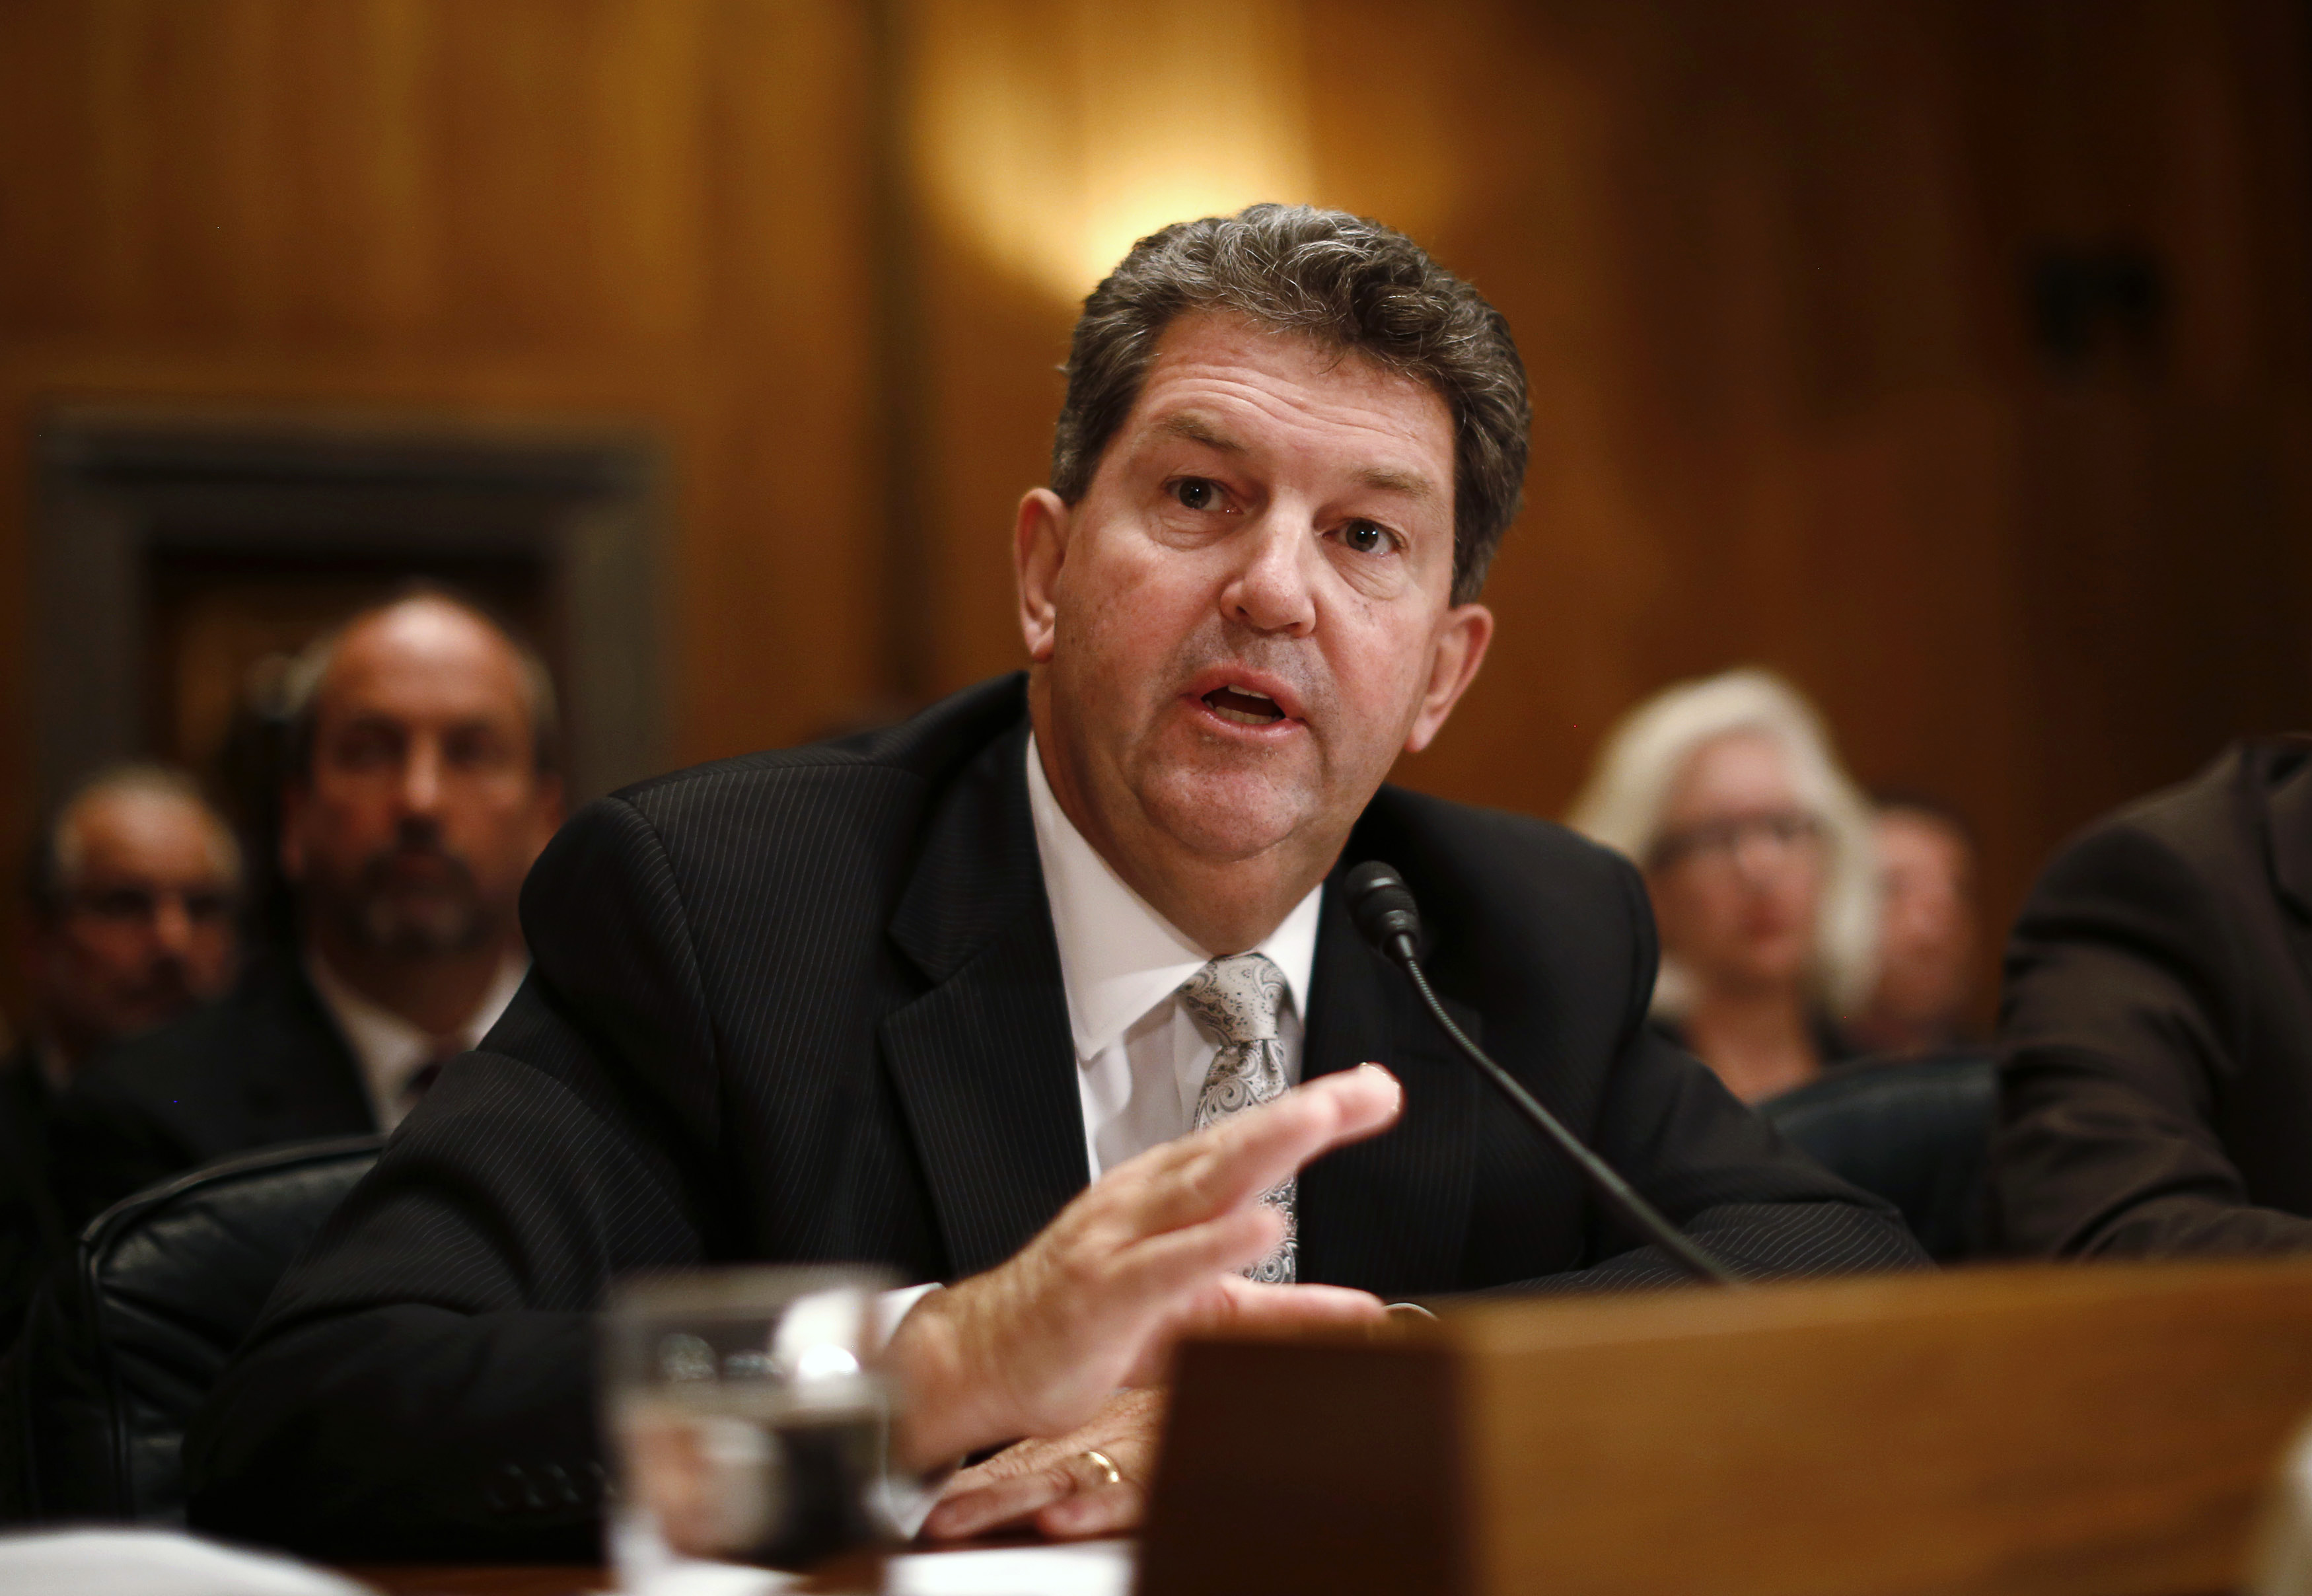 U.S. Postmaster General Patrick Donahoe speaks at a Senate Homeland Security and Governmental Affairs hearing on reforming the U.S. postal service on Sept. 26, 2013. Donahoe announced his retirement on Friday. (Jason Reed—Reuters)